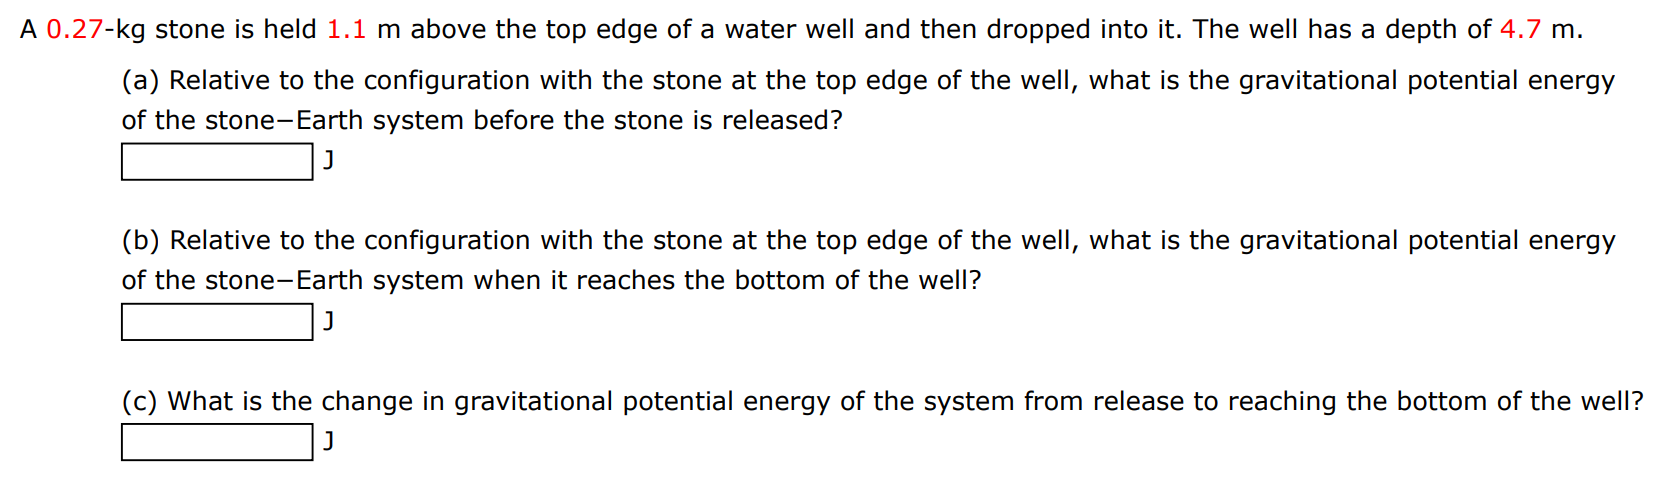 A 0.27−kg stone is held 1.1 m above the top edge of a water well and then dropped into it. The well has a depth of 4.7 m. (a) Relative to the configuration with the stone at the top edge of the well, what is the gravitational potential energy of the stone-Earth system before the stone is released? J (b) Relative to the configuration with the stone at the top edge of the well, what is the gravitational potential energy of the stone-Earth system when it reaches the bottom of the well? J (c) What is the change in gravitational potential energy of the system from release to reaching the bottom of the well? J 